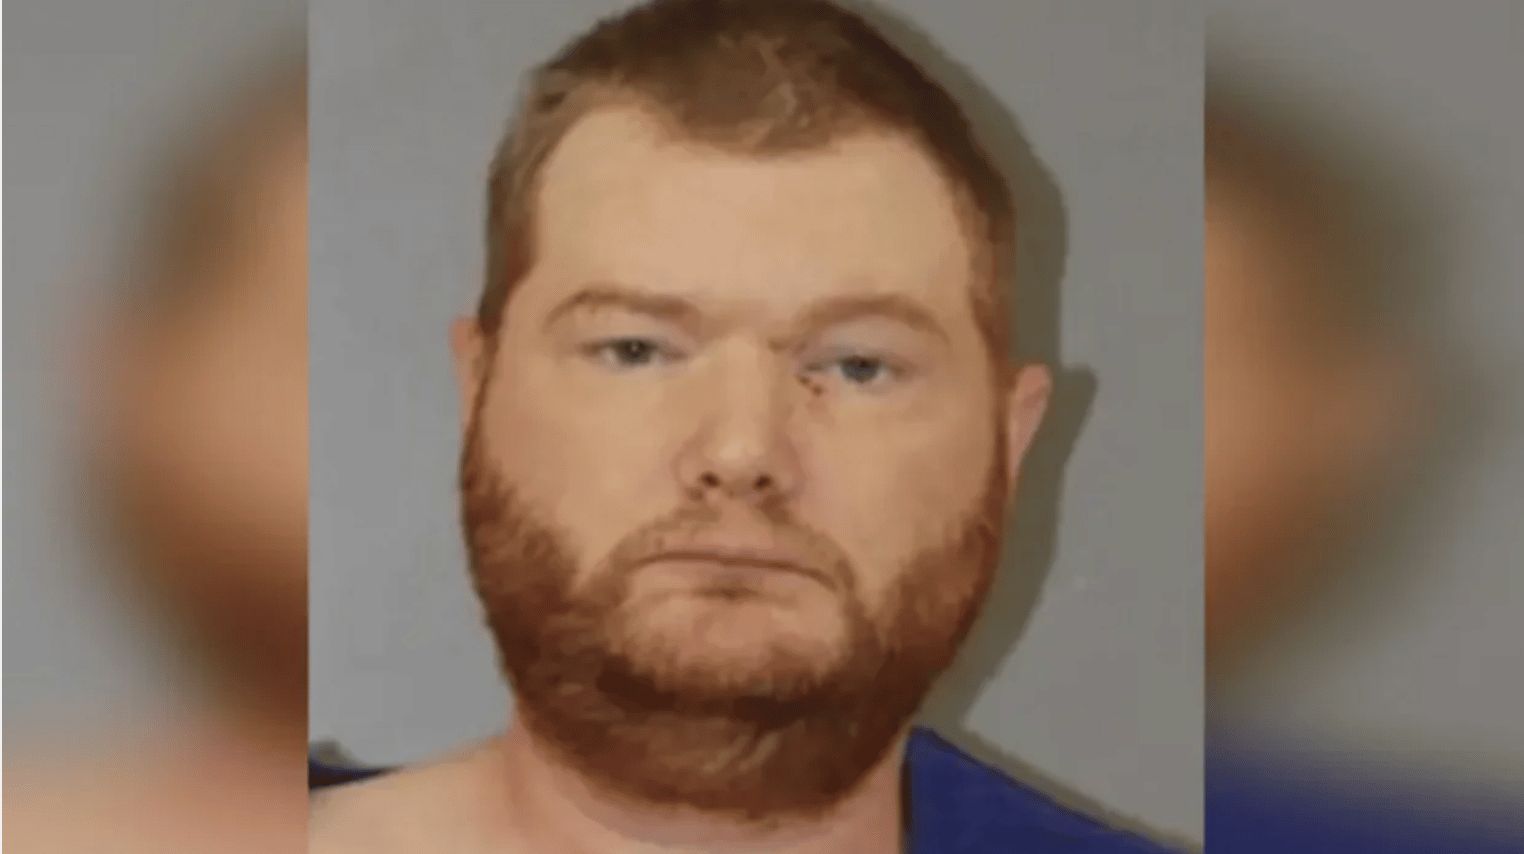 Alabama man decapitated and stabbed girlfriend over 100 times after she refused to have birthday sex with him